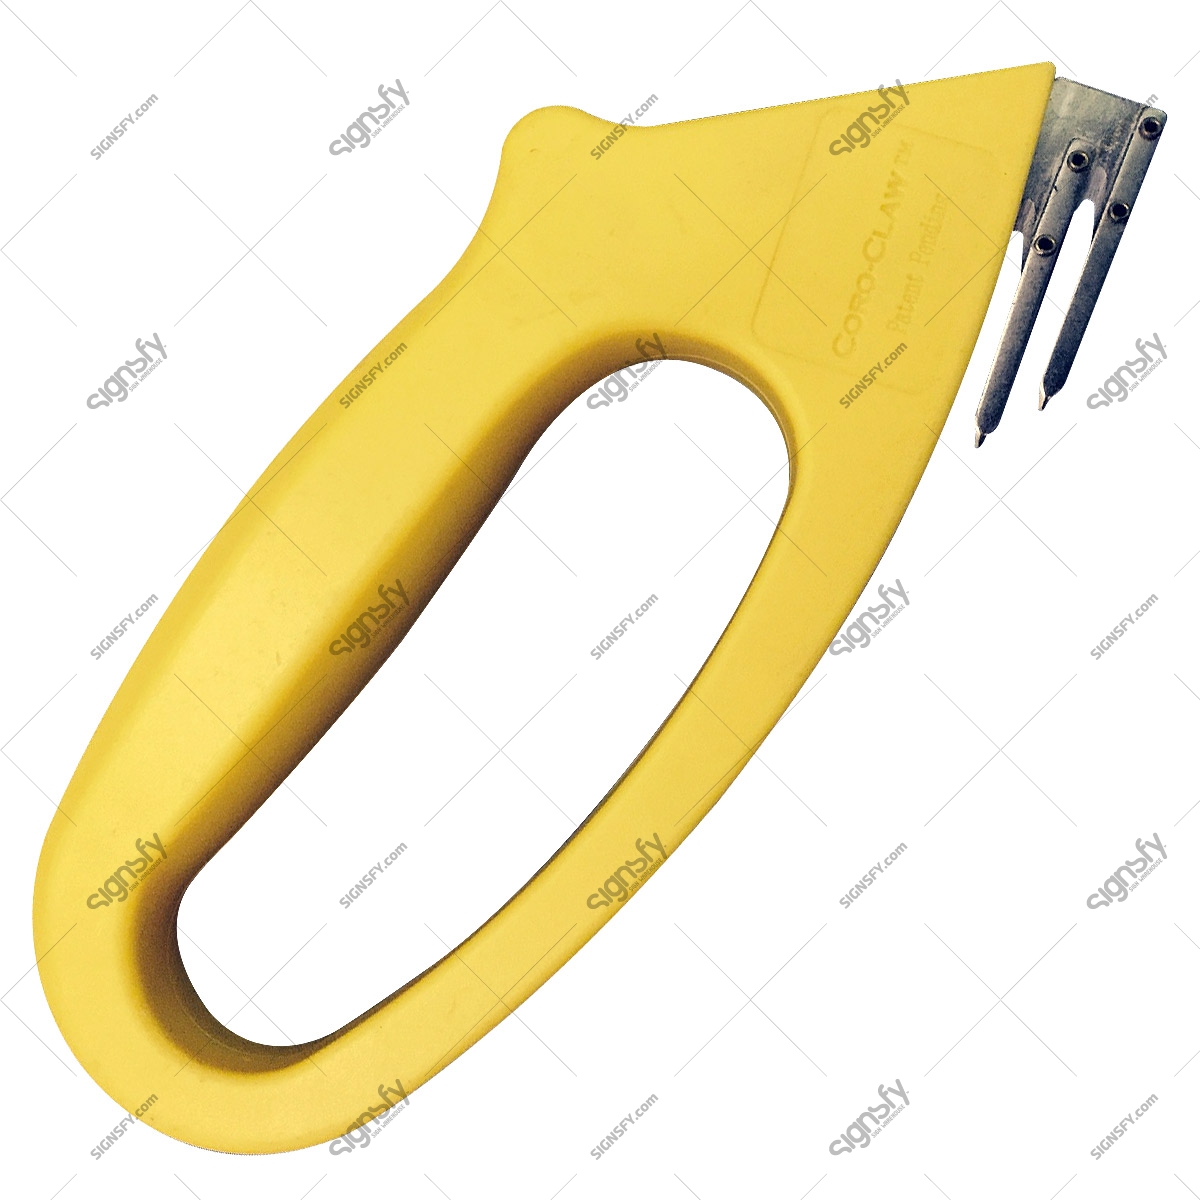 Coro Claw 4 mil Cutter